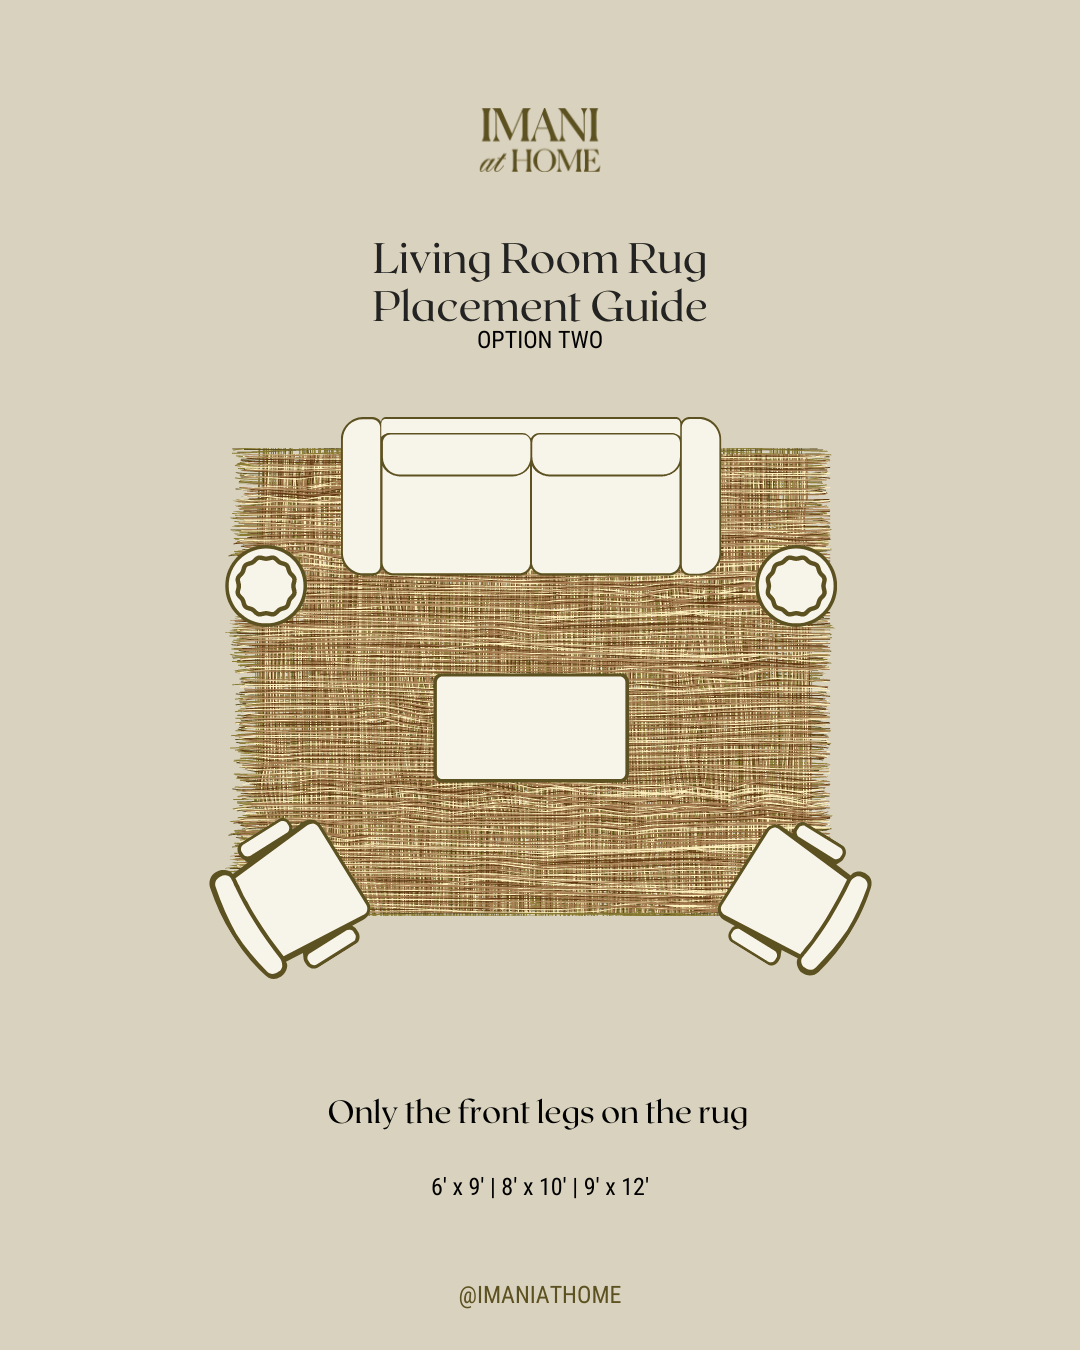 Bedroom Rug Size and Placement Guide - Inspiration For Moms